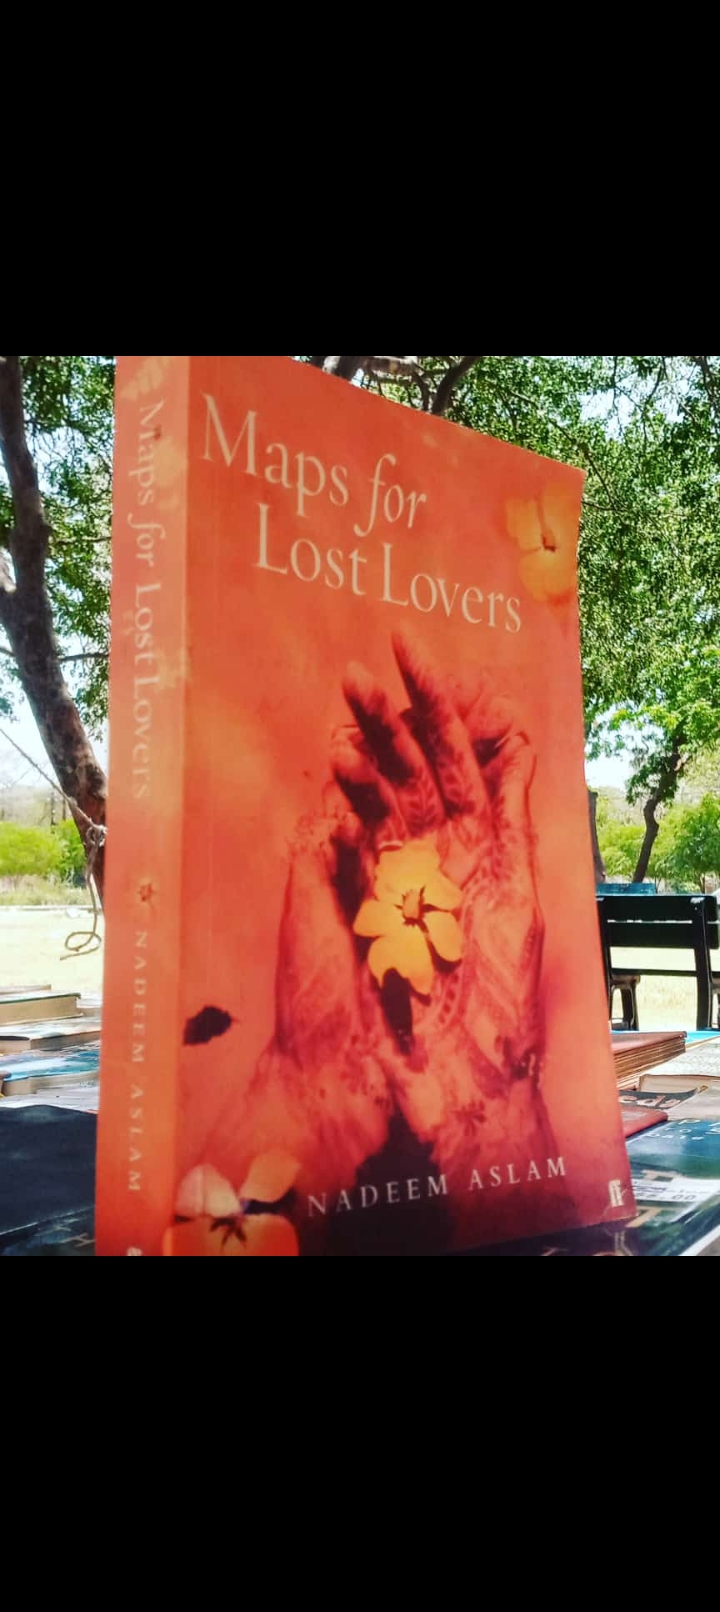 maps for lost lovers by nadeem aslam. original large size paperback